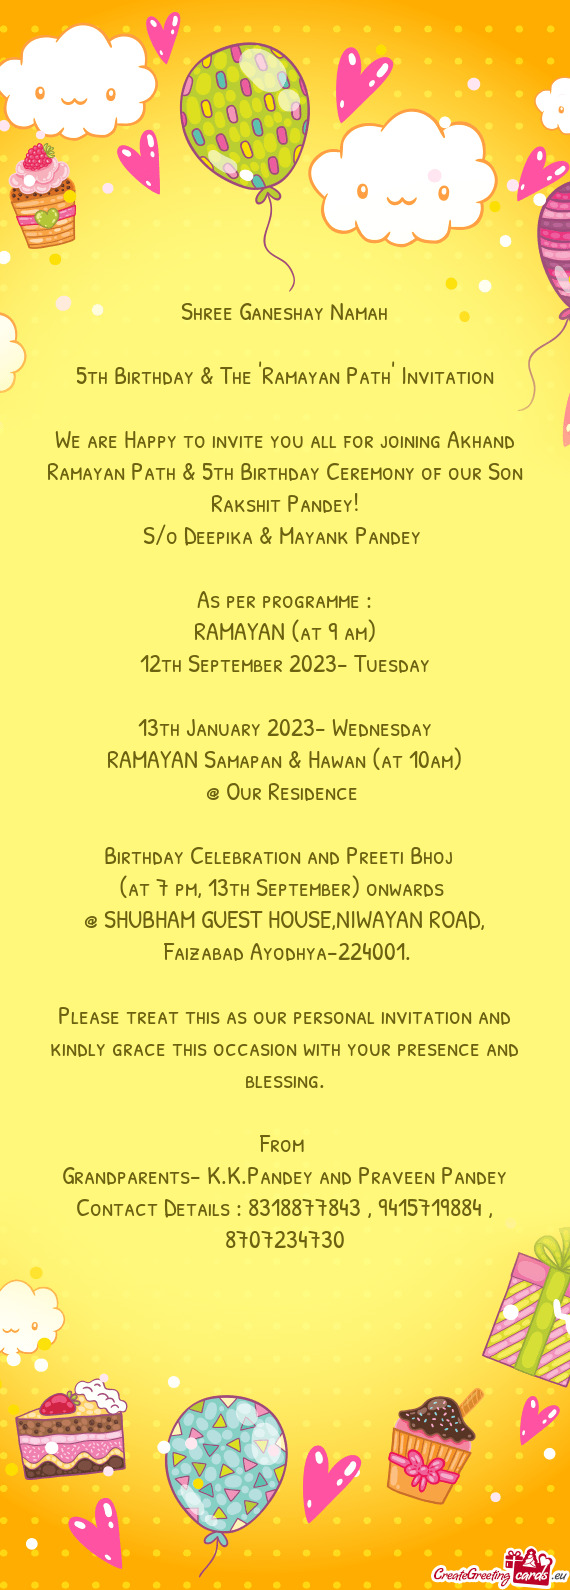 We are Happy to invite you all for joining Akhand Ramayan Path & 5th Birthday Ceremony of our Son